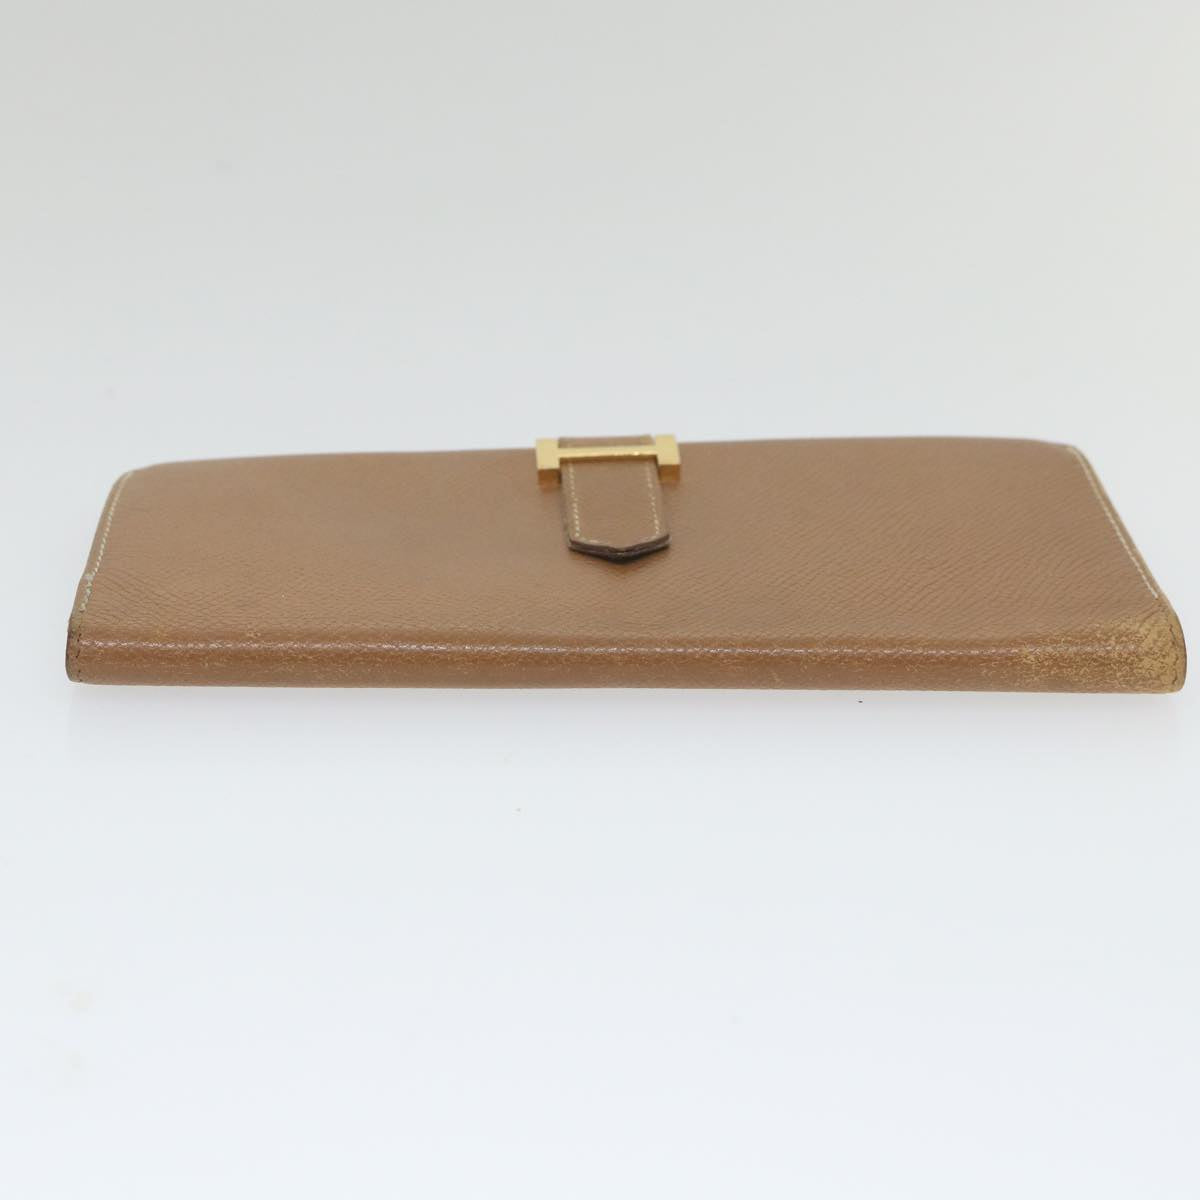 HERMES Bean Wallet Leather Brown Auth 56696